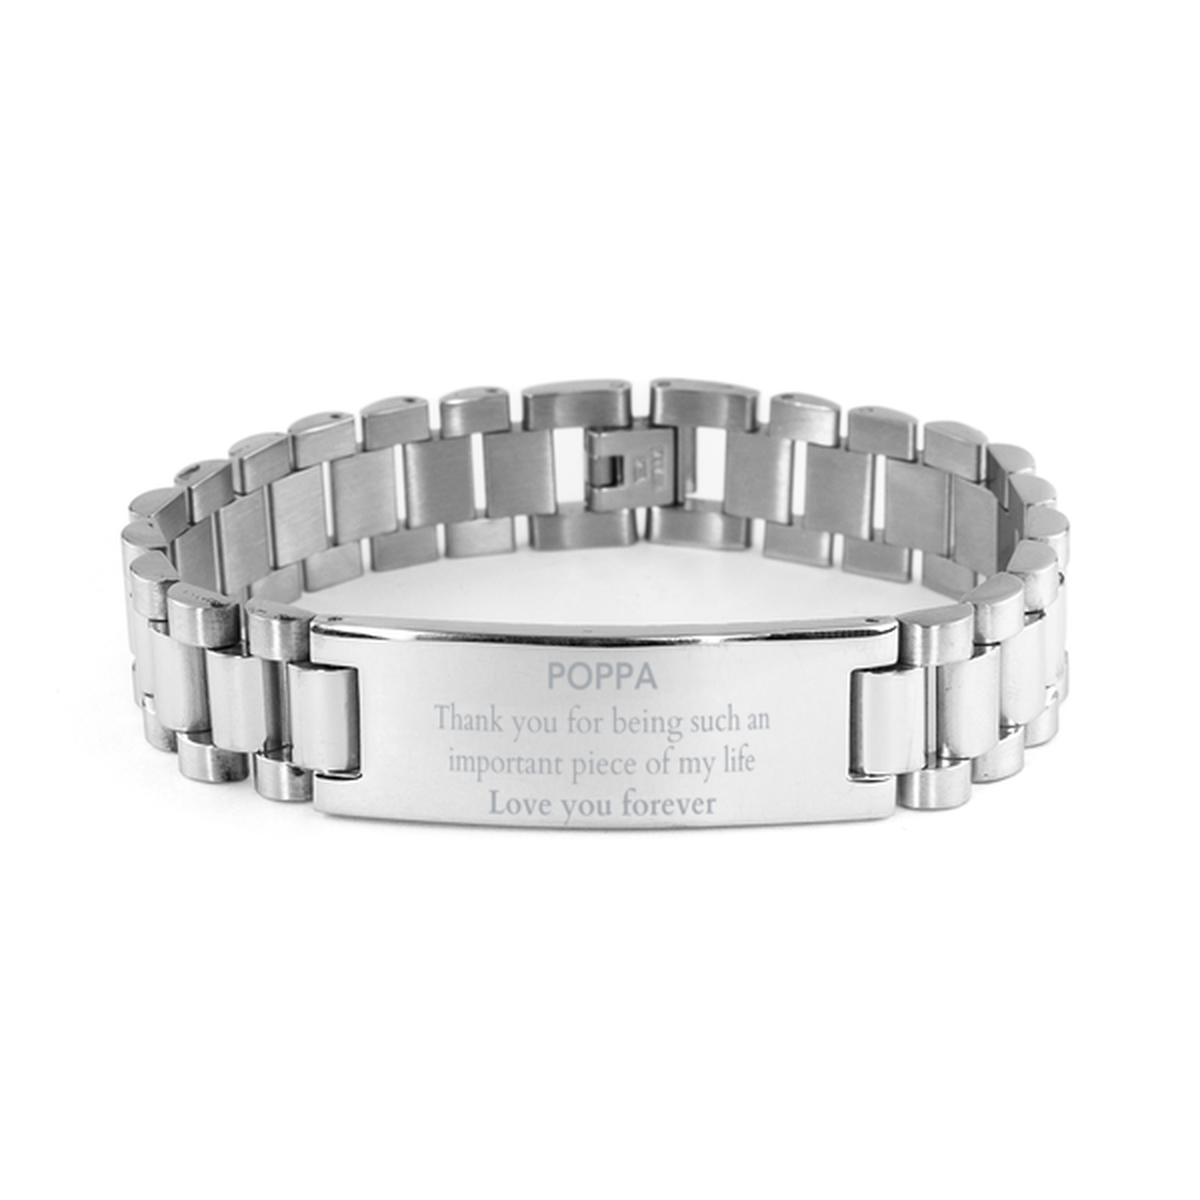 Appropriate Poppa Ladder Stainless Steel Bracelet Epic Birthday Gifts for Poppa Thank you for being such an important piece of my life Poppa Christmas Mothers Fathers Day